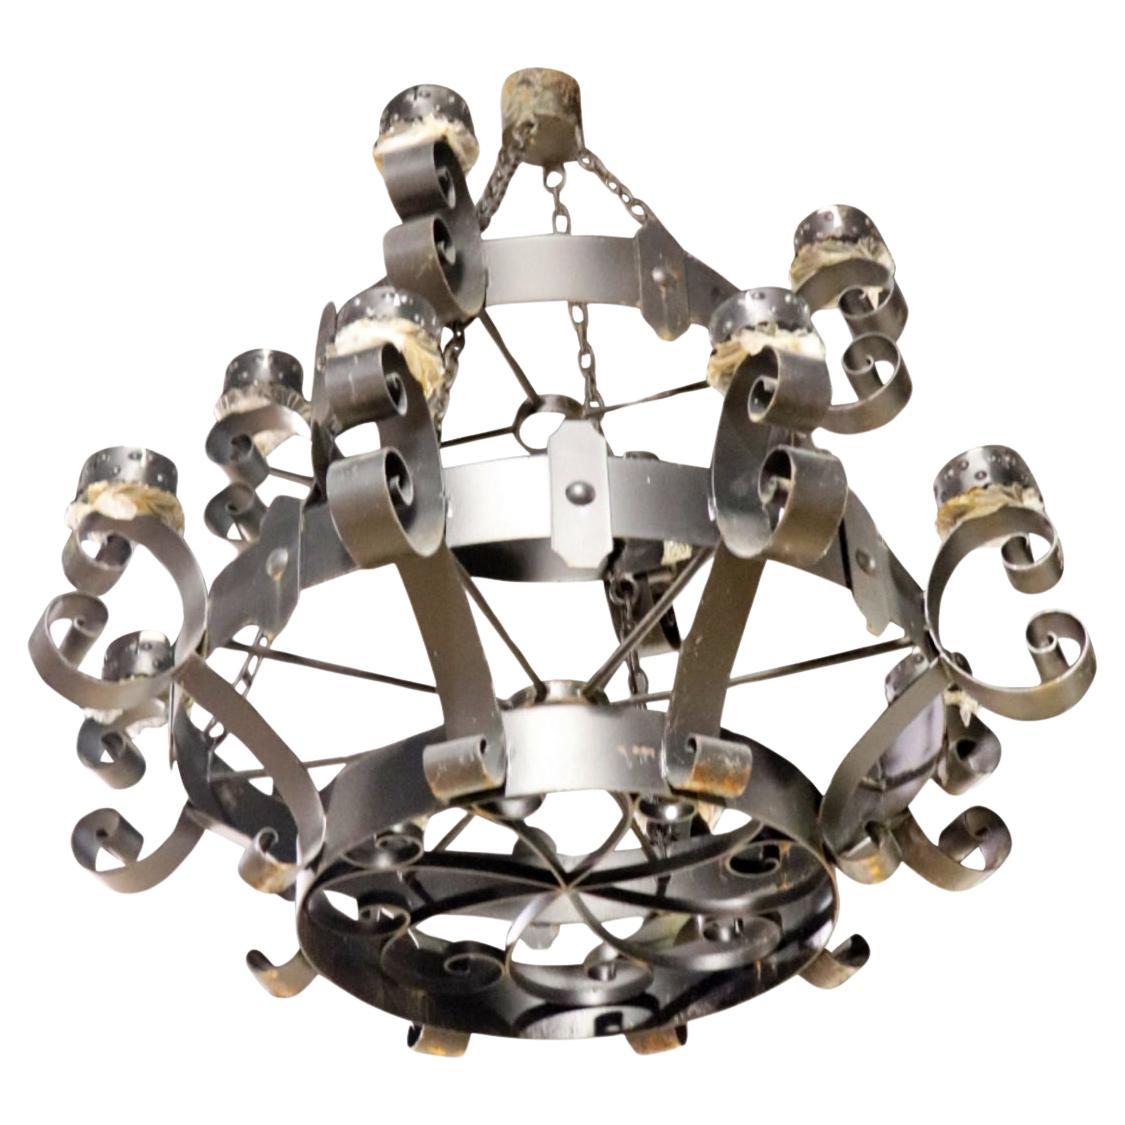 Monumental European Gothic Wrought Iron Black Gothic Chandelier 3 of 3 For Sale